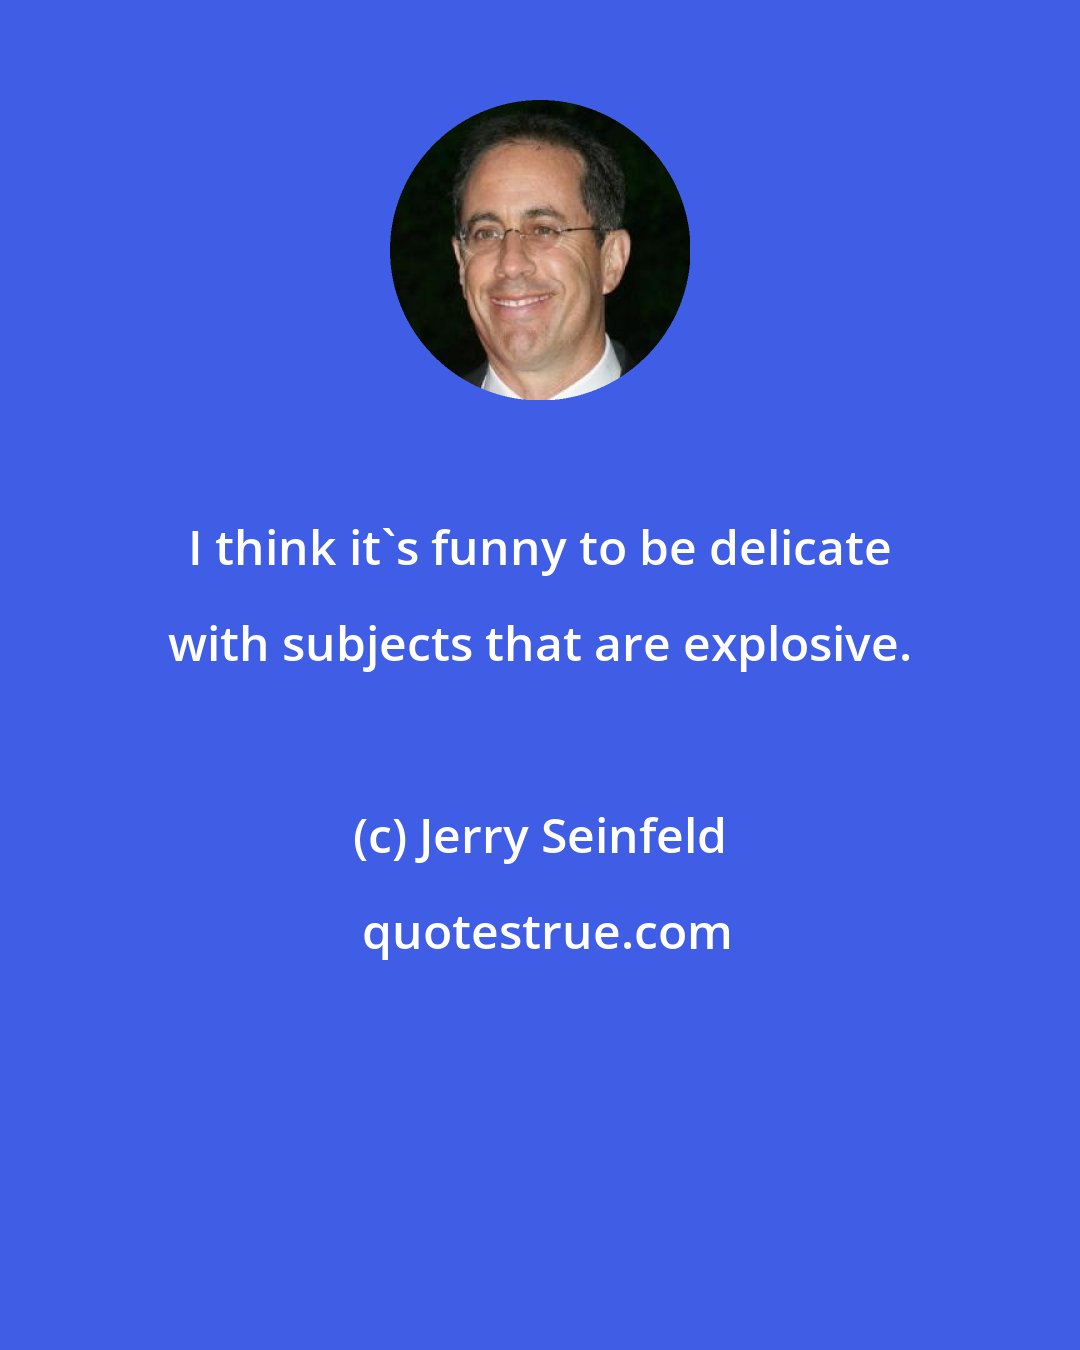 Jerry Seinfeld: I think it's funny to be delicate with subjects that are explosive.